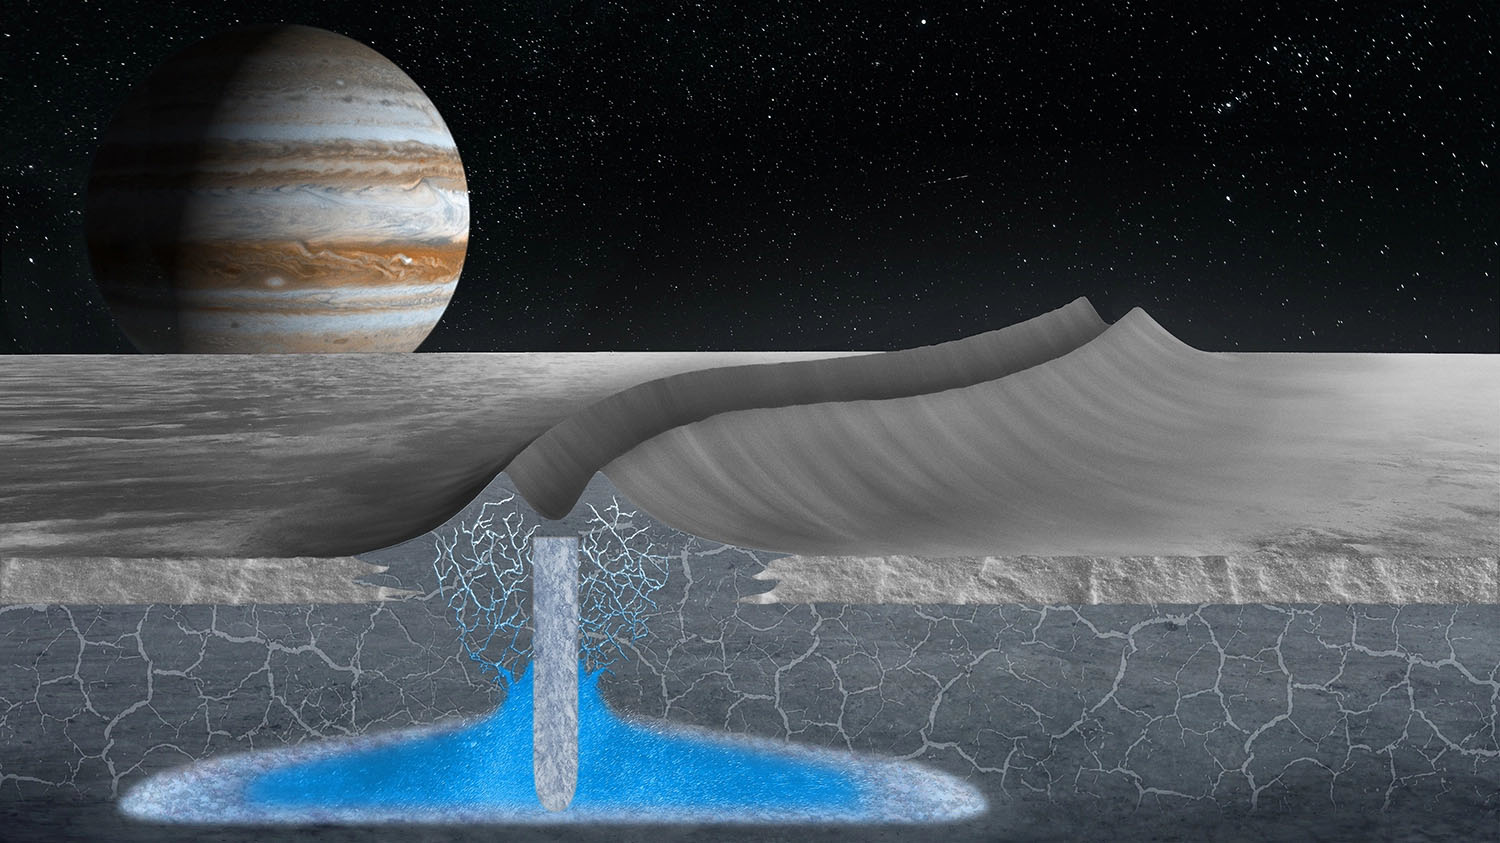 double ridges on the surface of Jupiter’s moon Europa may form over shallow, refreezing water pockets within the ice shell